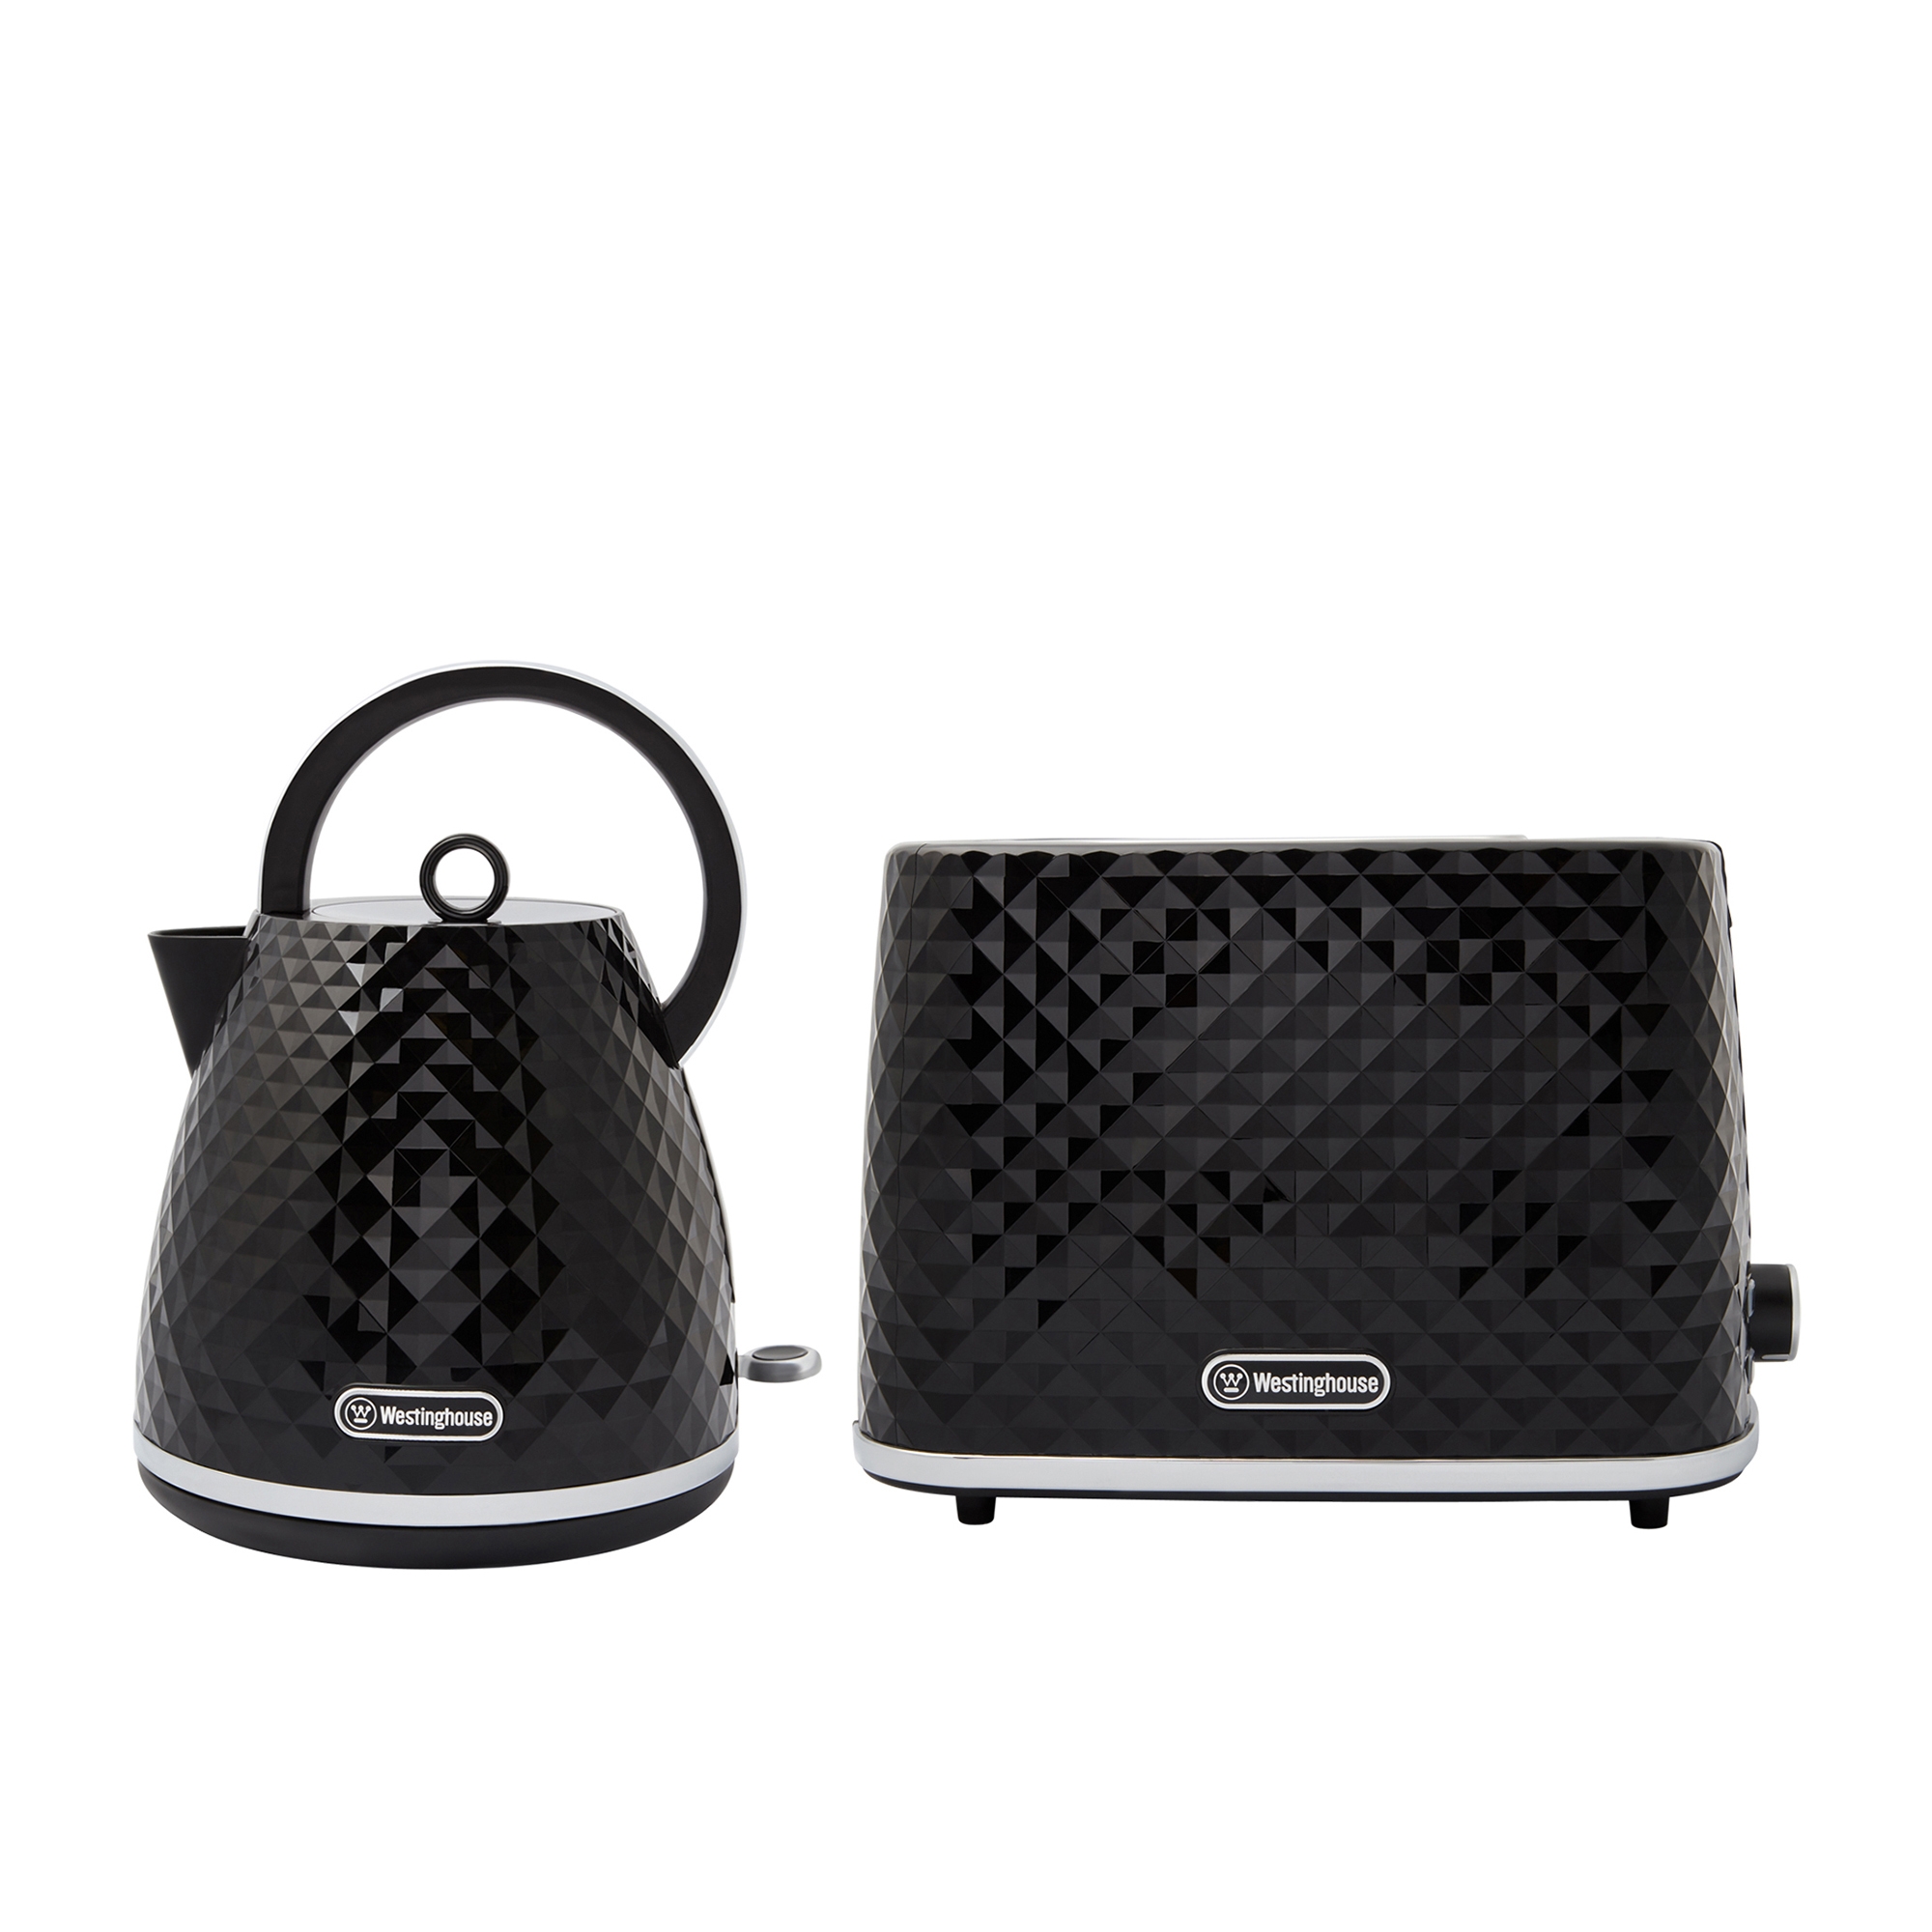 Westinghouse Kettle and Toaster Pack Black - Diamond Pattern Image 1